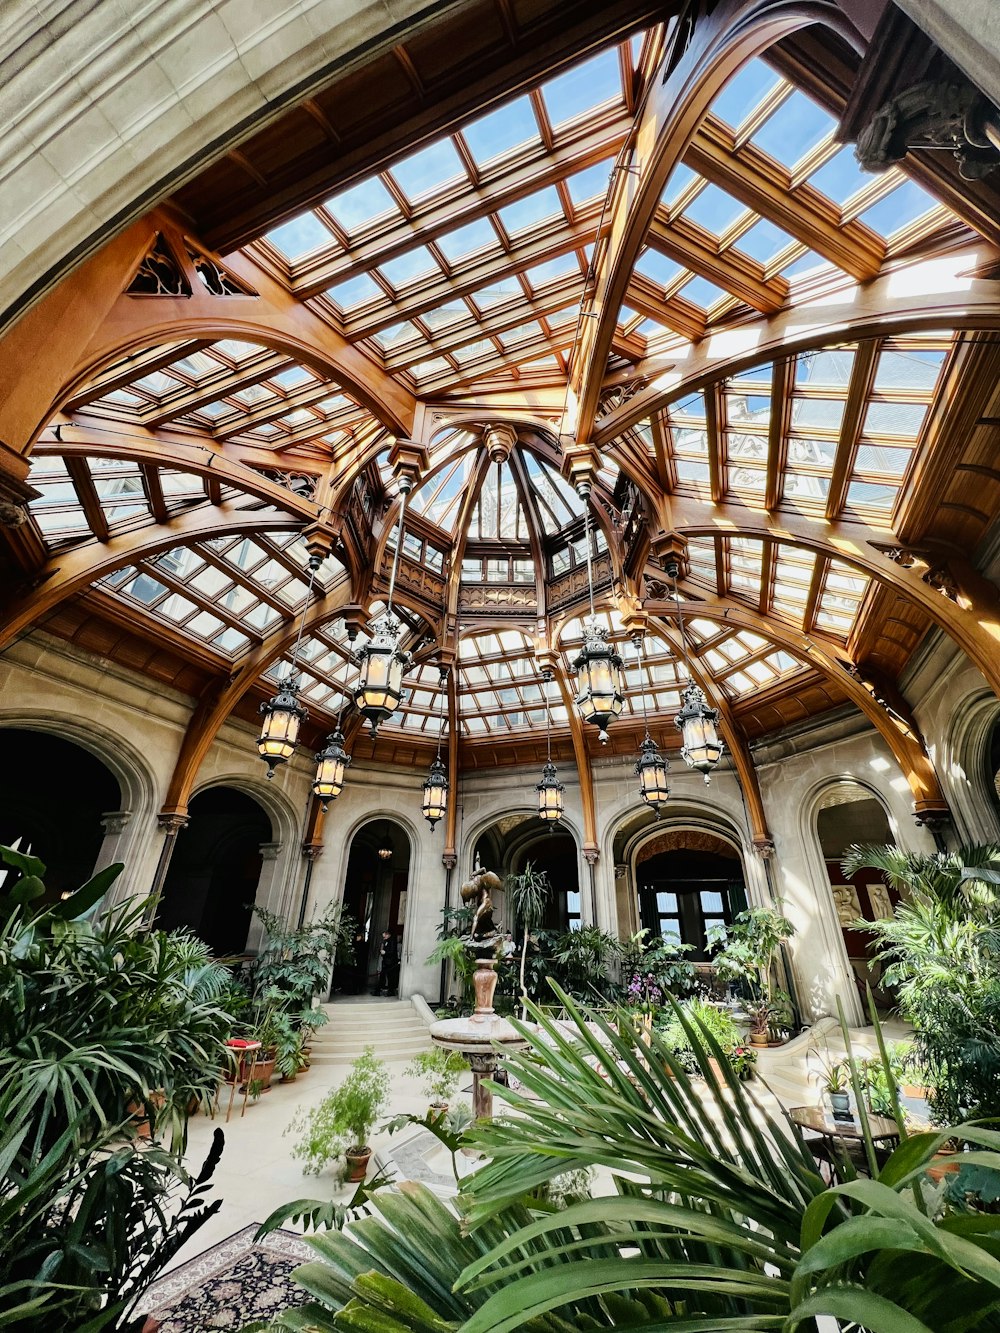 the inside of a building with a glass roof